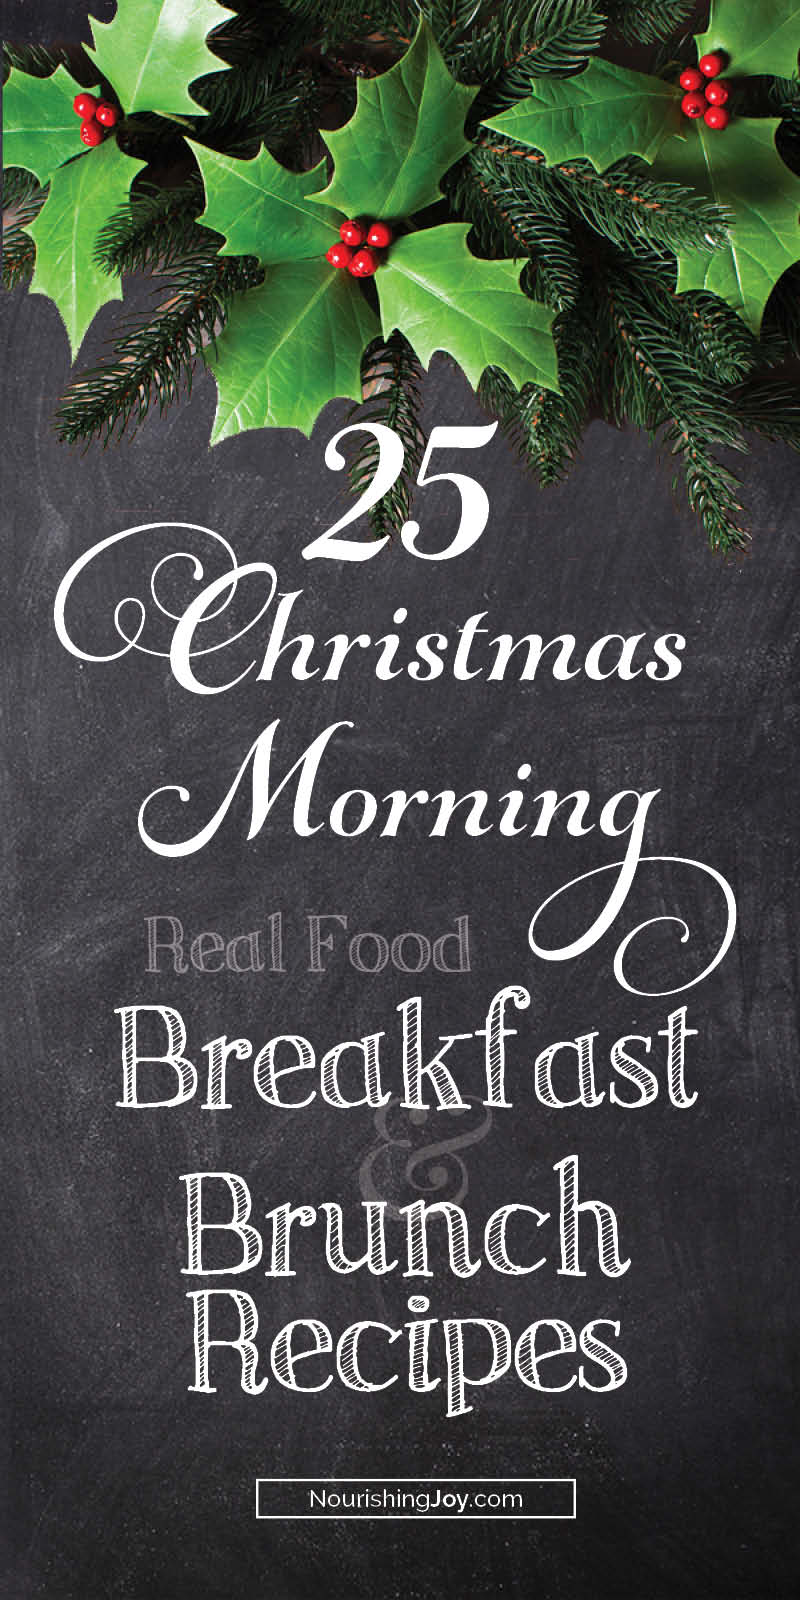 Whether you're feeding just your family or feeding a crowd on Christmas morning, make it cheery, hearty, and nourishing with these favorite Christmas breakfast recipes.